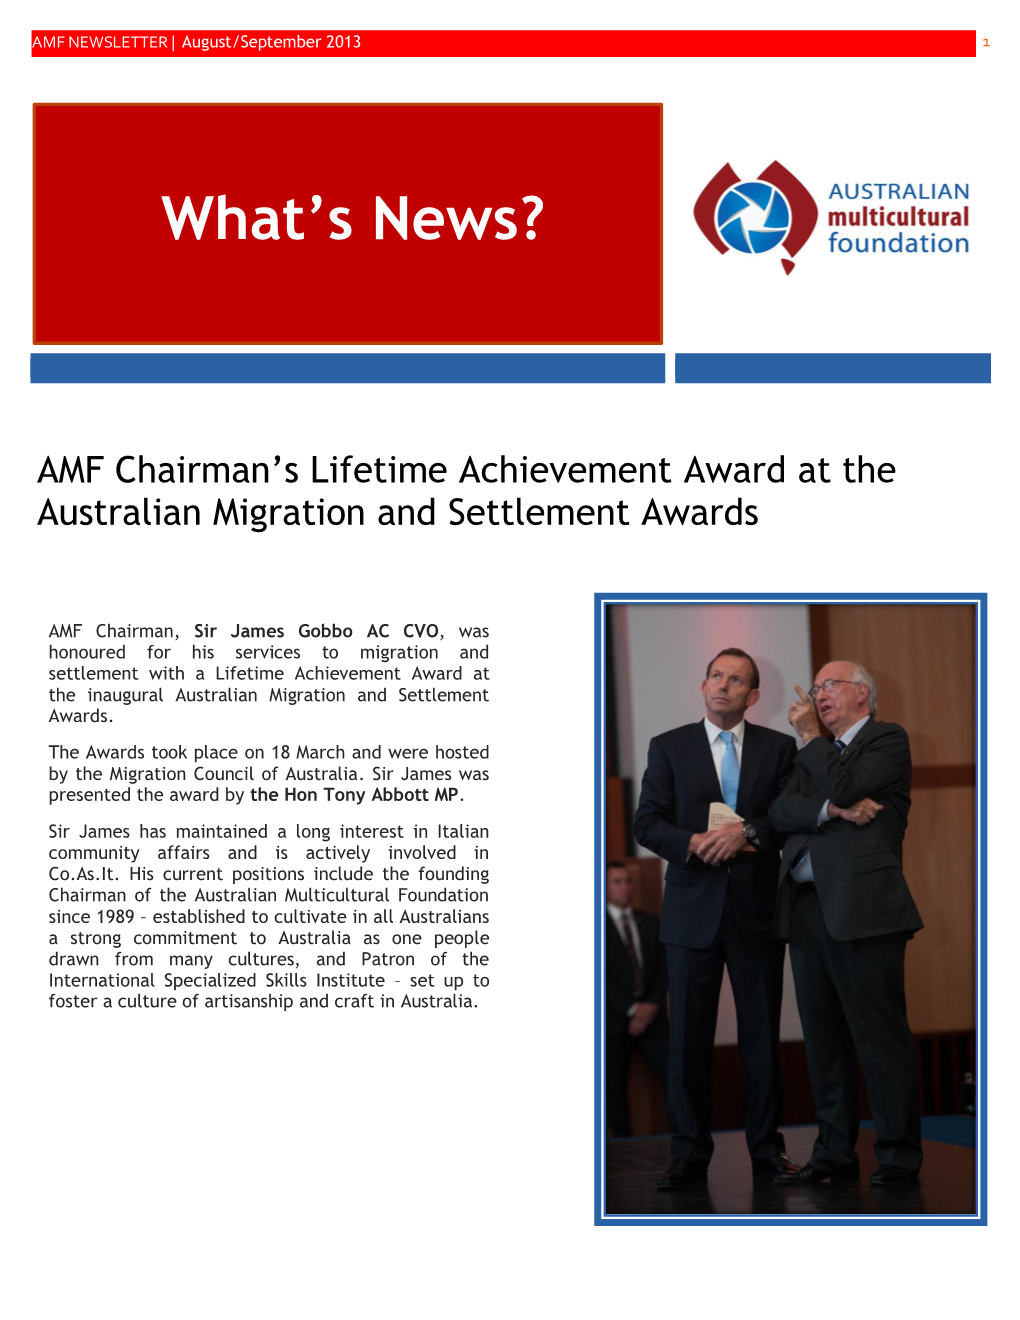 Download/View AMF August/September 2013 Newsletter